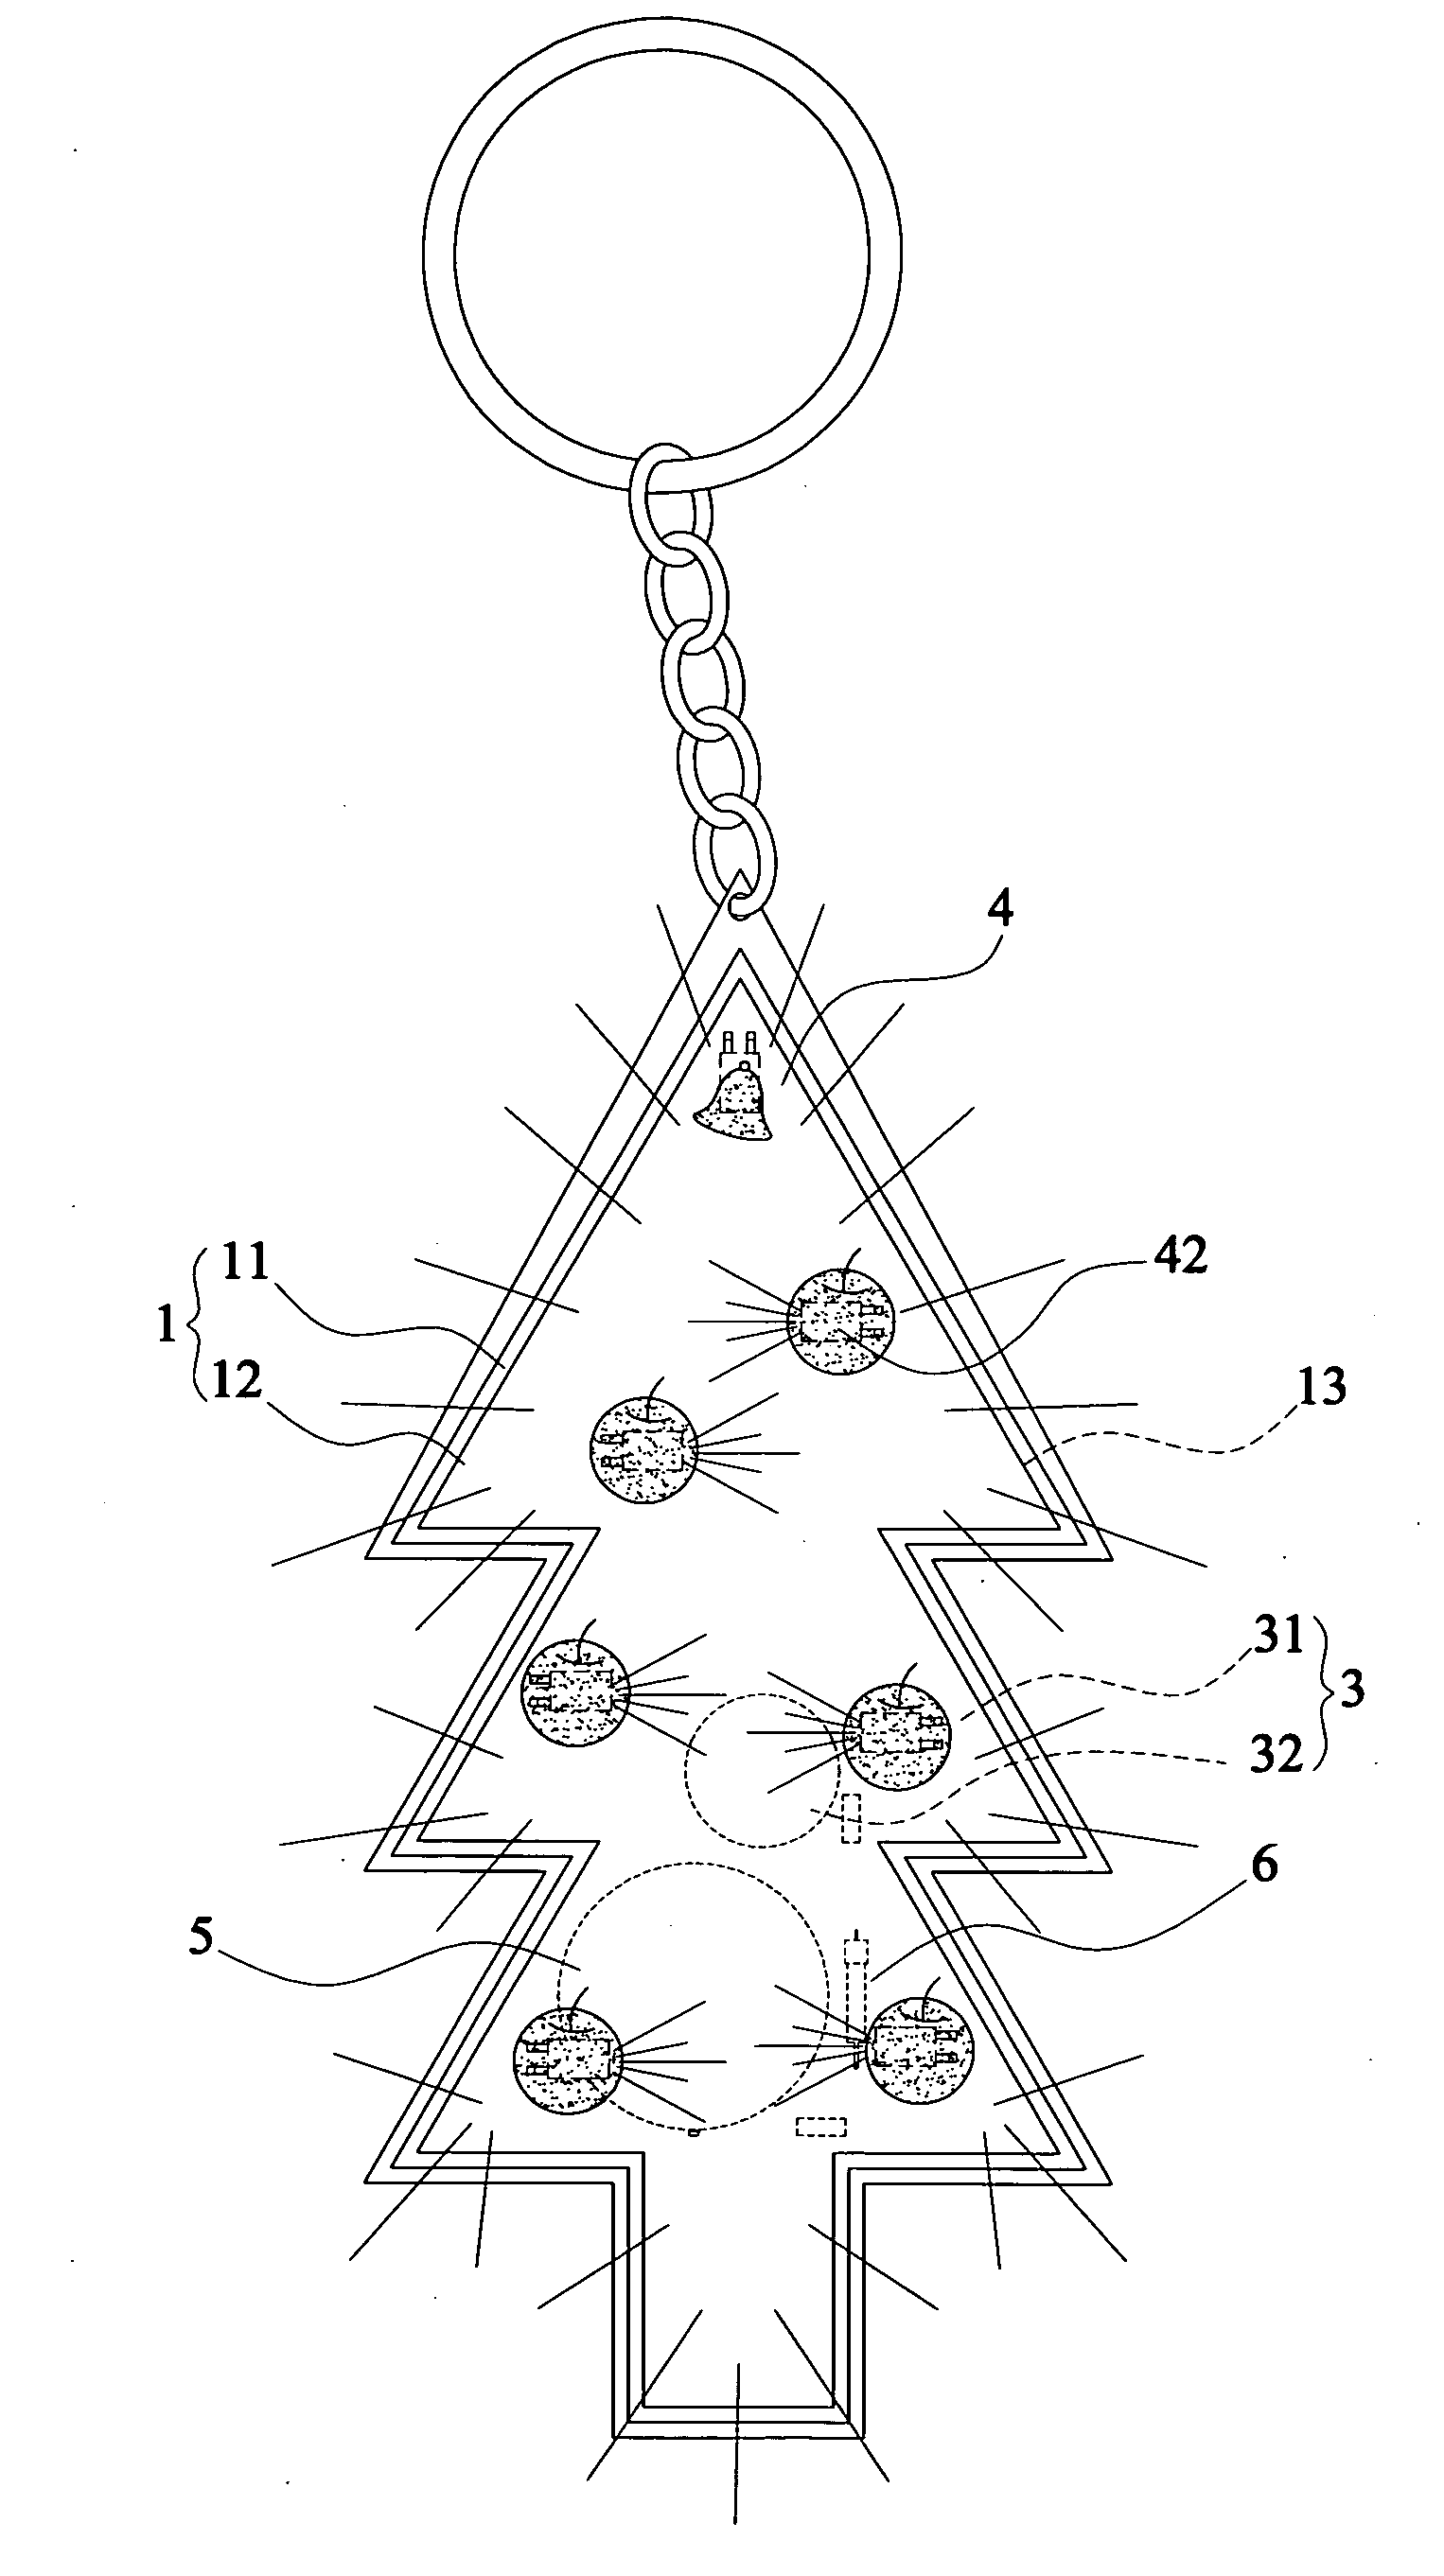 Vibrating and twinkling LED backlighting device